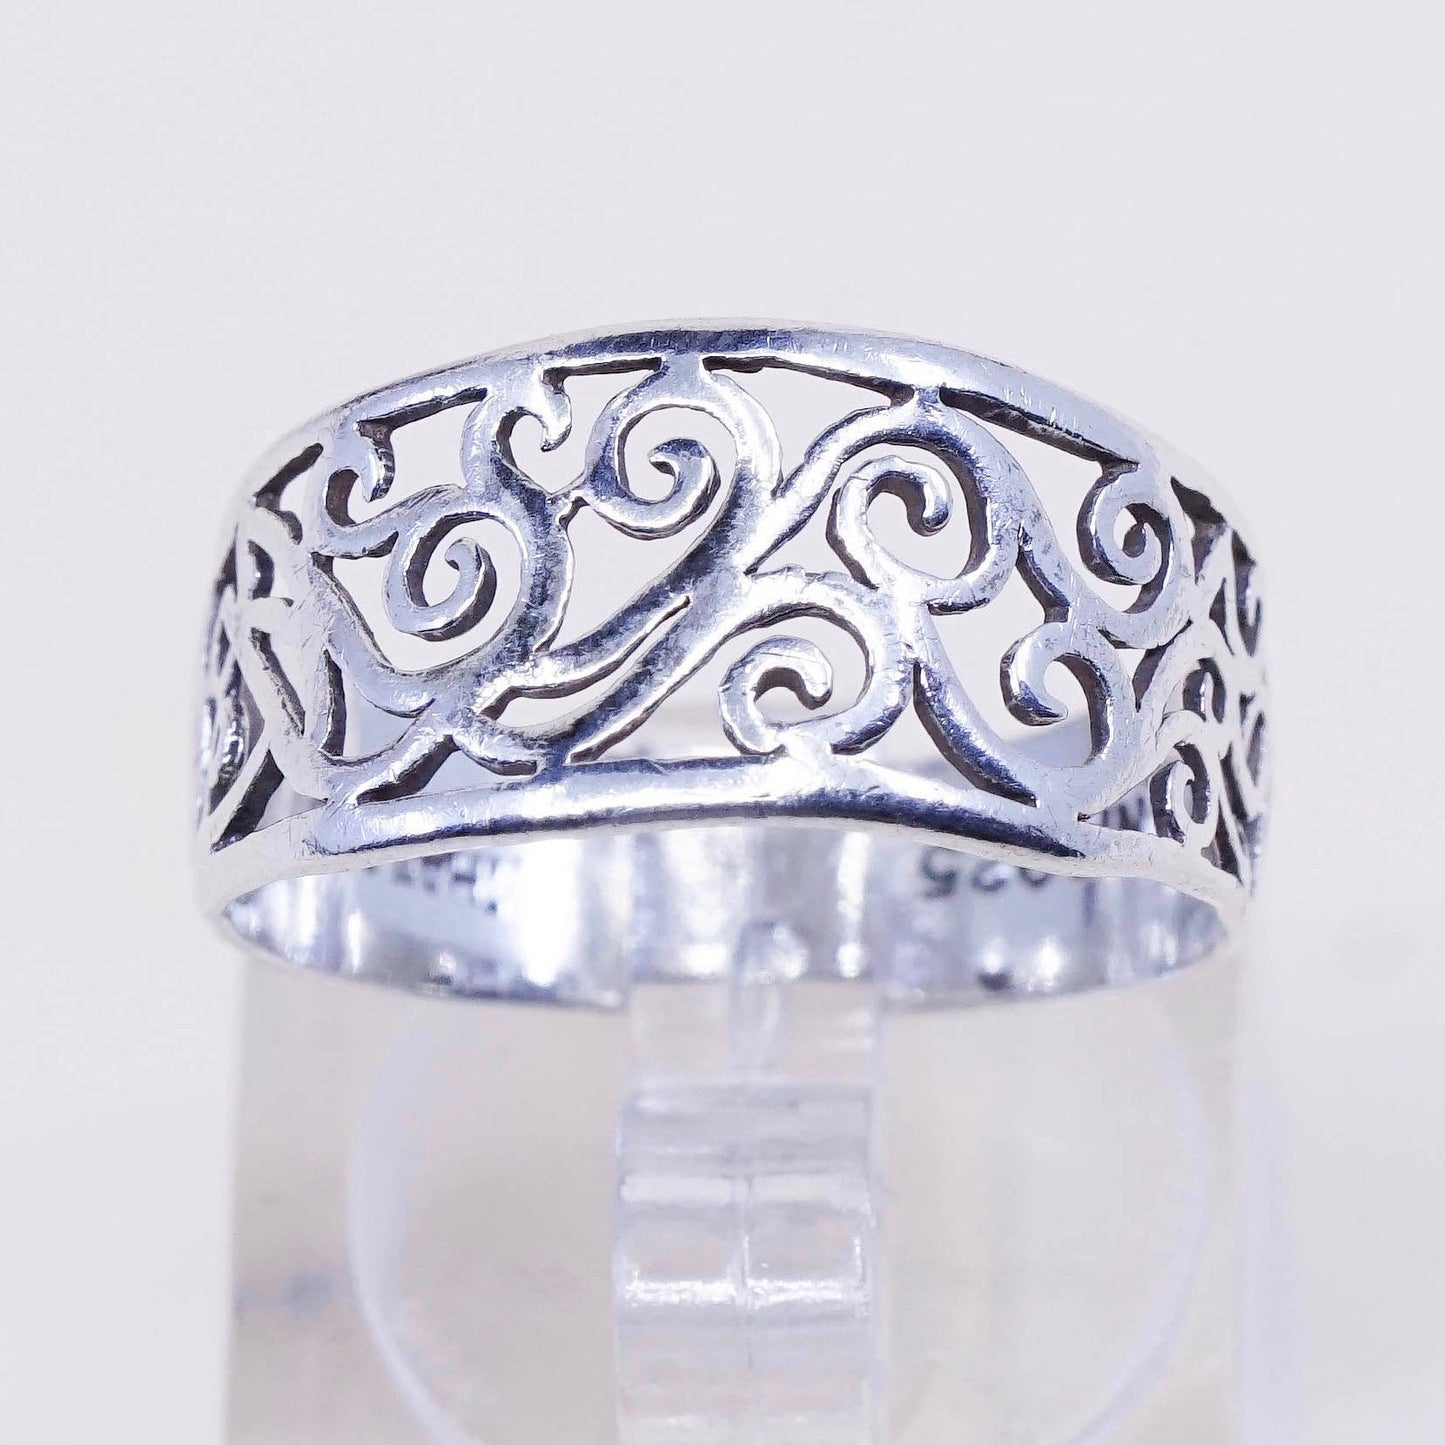 Size 7.25, vintage sterling silver handmade ring, 925 band with whirl filigree